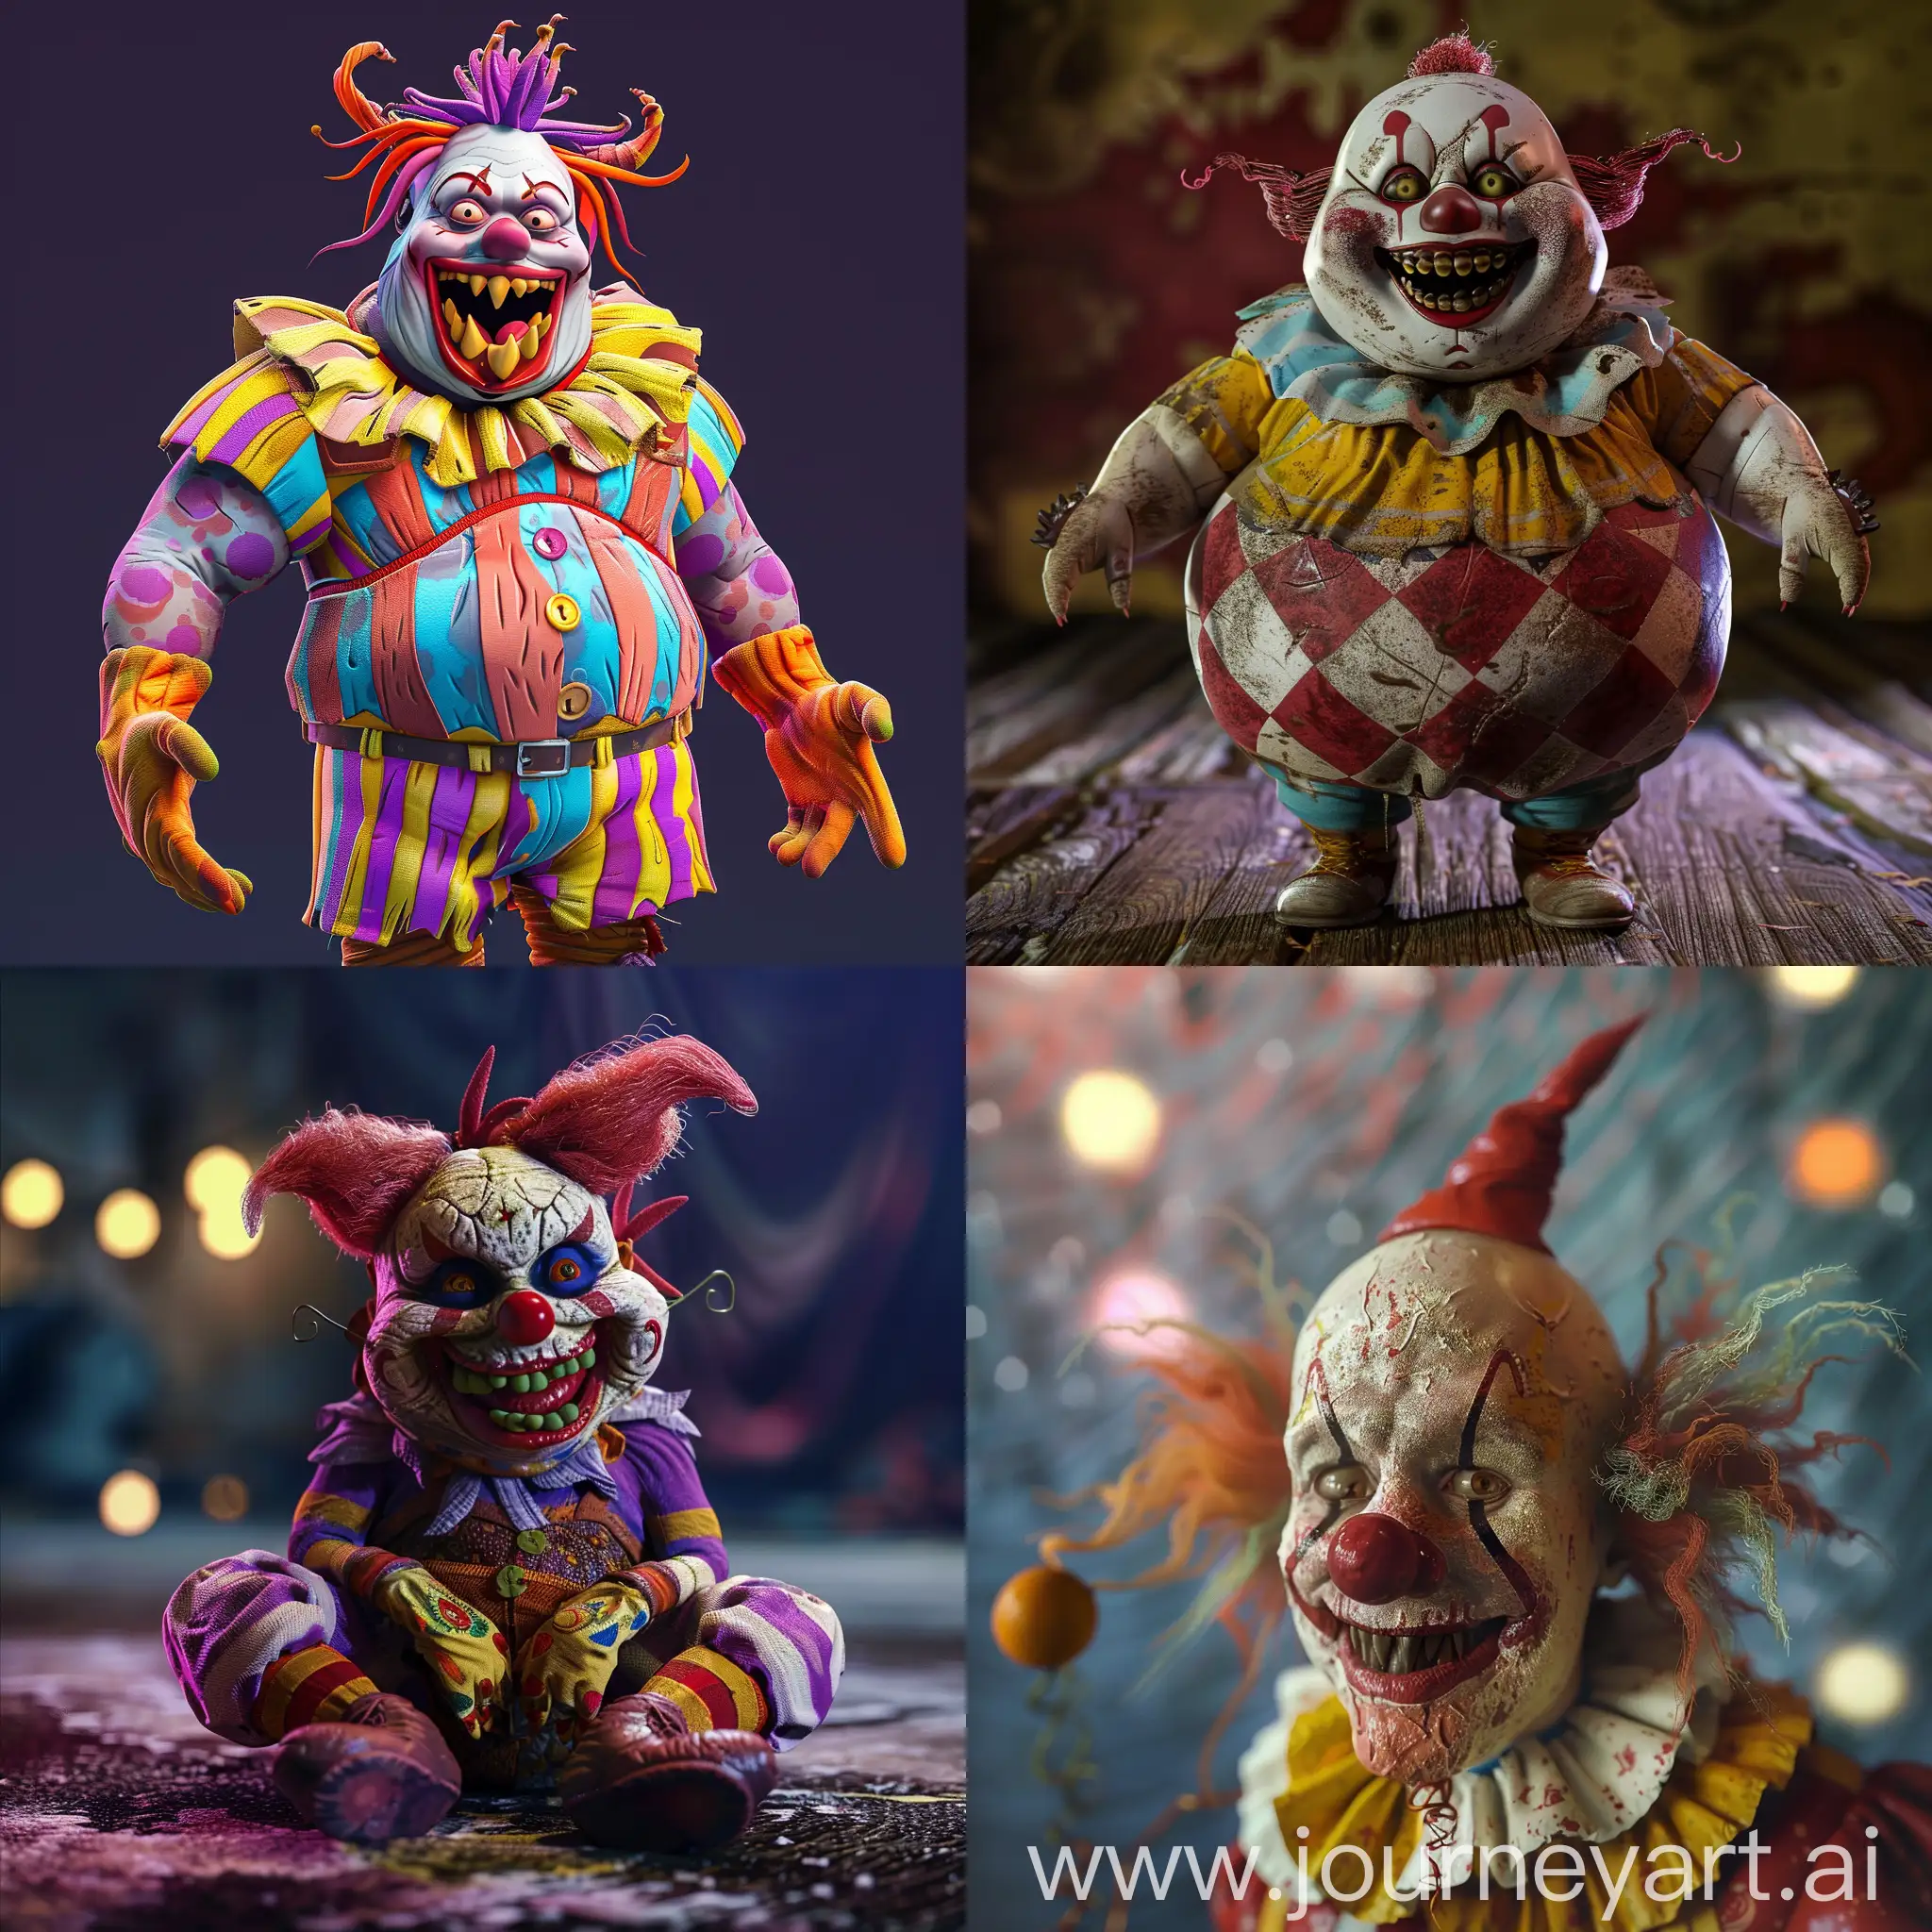 Dropsy the Clown from the game of the same name in photo style 